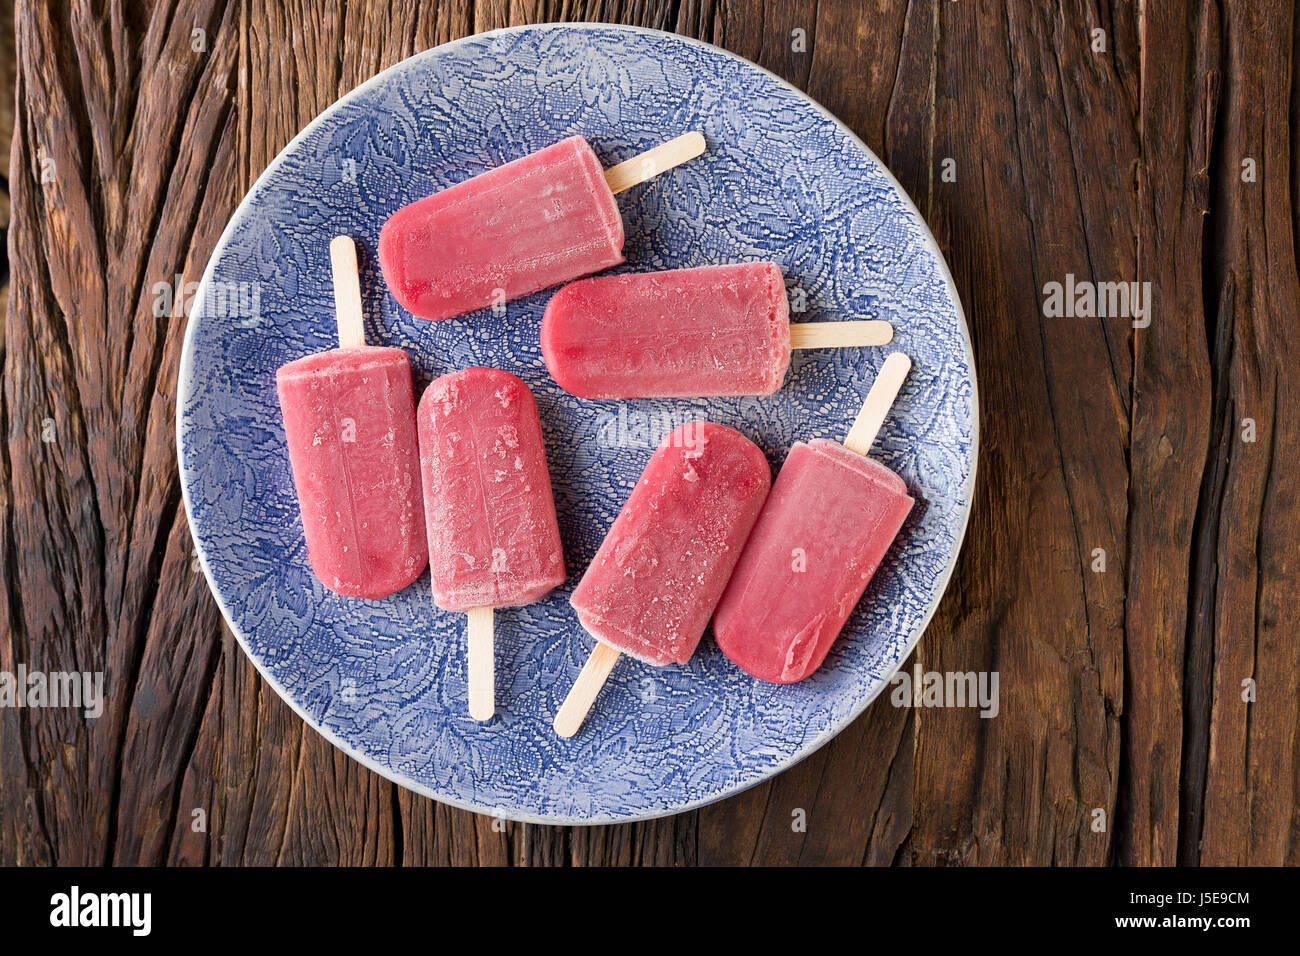 Homemade Raspberry and vanilla ice pops on a rustic wood background. Berry icecream popsicles. Summer food. Stock Photo